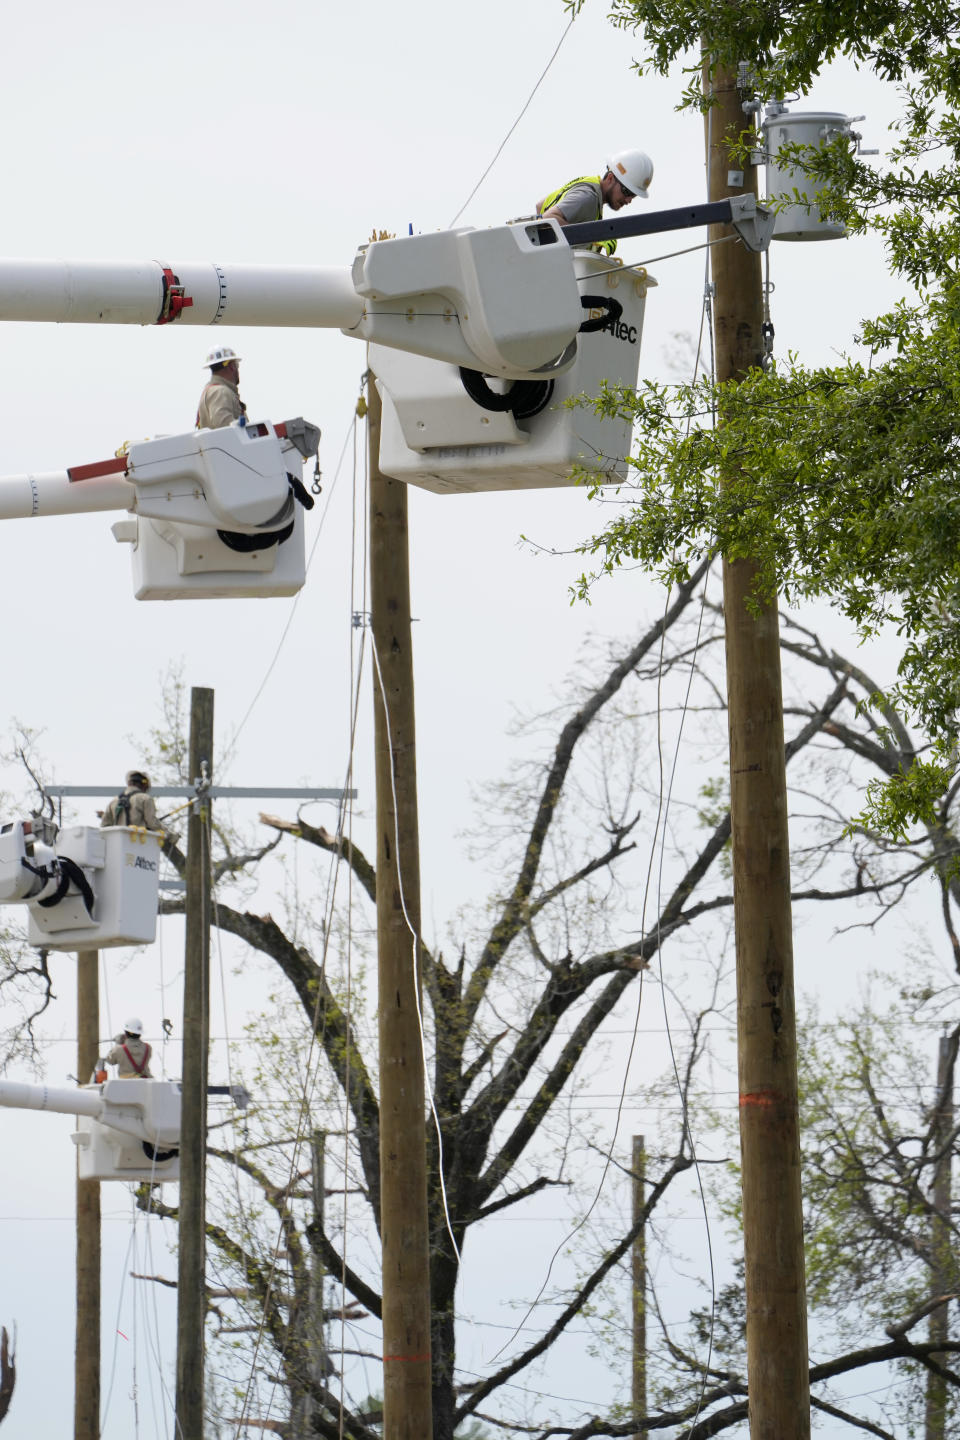 Utility linemen string cables on new light poles during recovery from the March 24 killer tornado that rolled through Rolling Fork, Miss., on March 29, 2023. Many area residents are hopeful the county seat will be rebuilt with improvements to the city's infrastructure. (AP Photo/Rogelio V. Solis)